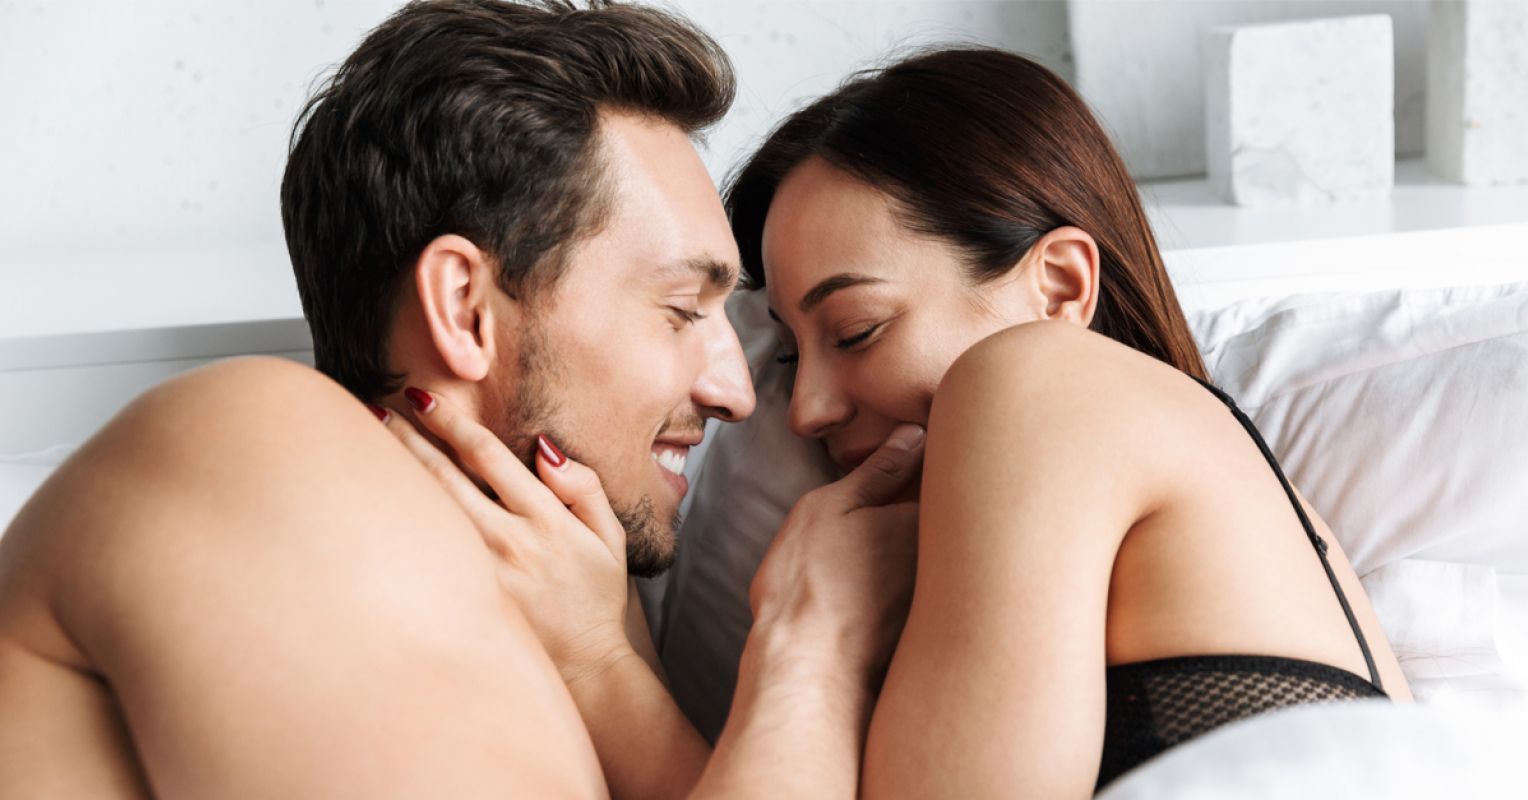 4 Ways Married Couples Can Keep Having Great Sex Psychology Today image